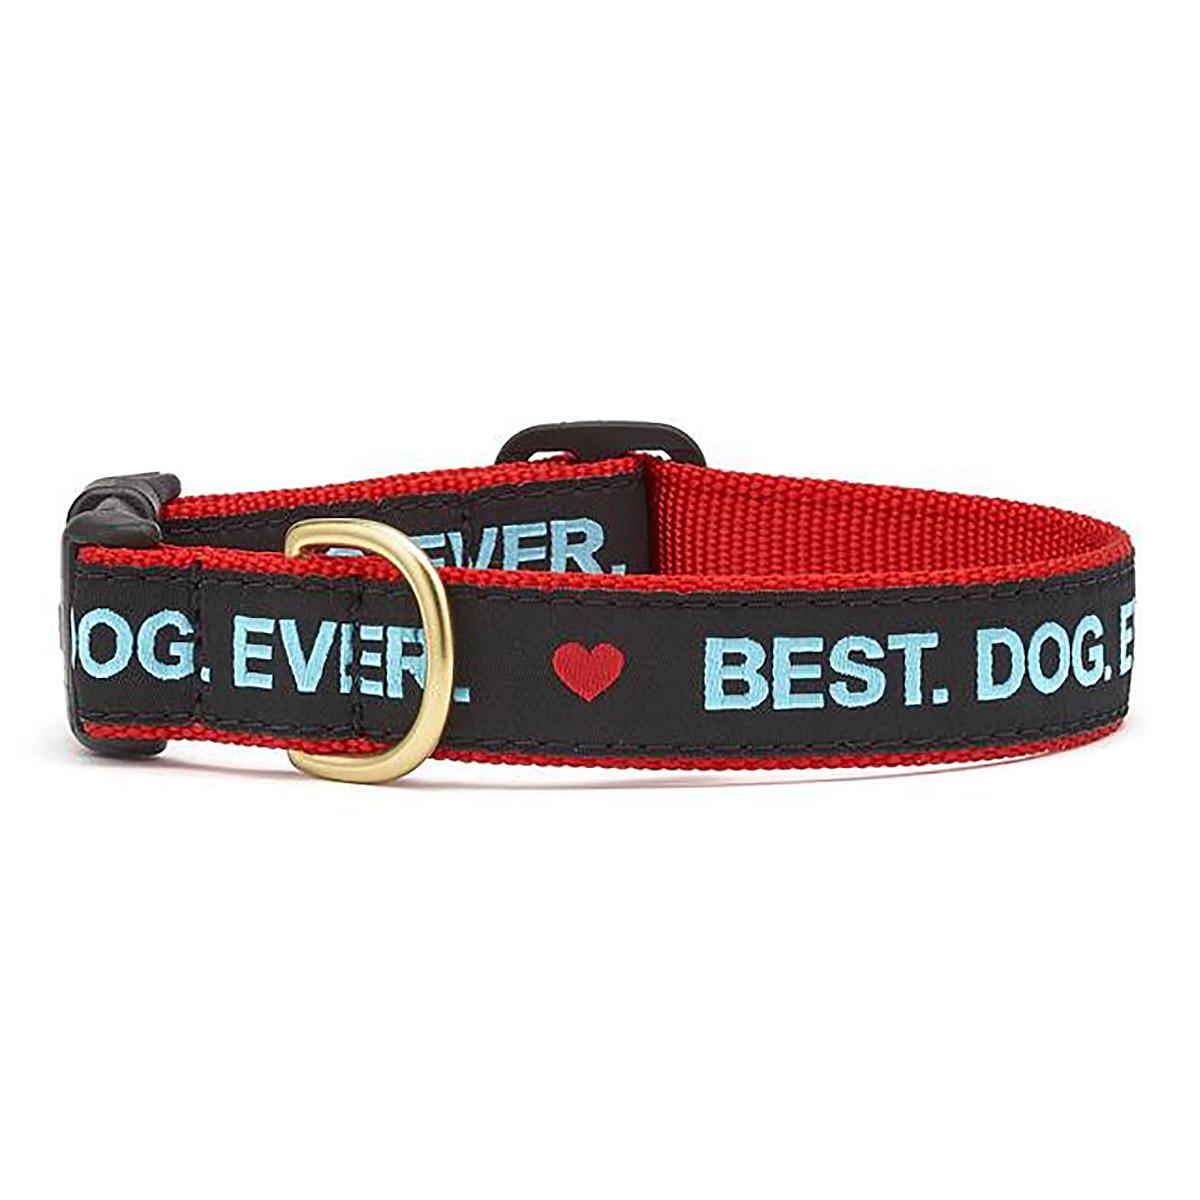 Best. Dog. Ever. Dog Collar by Up Country